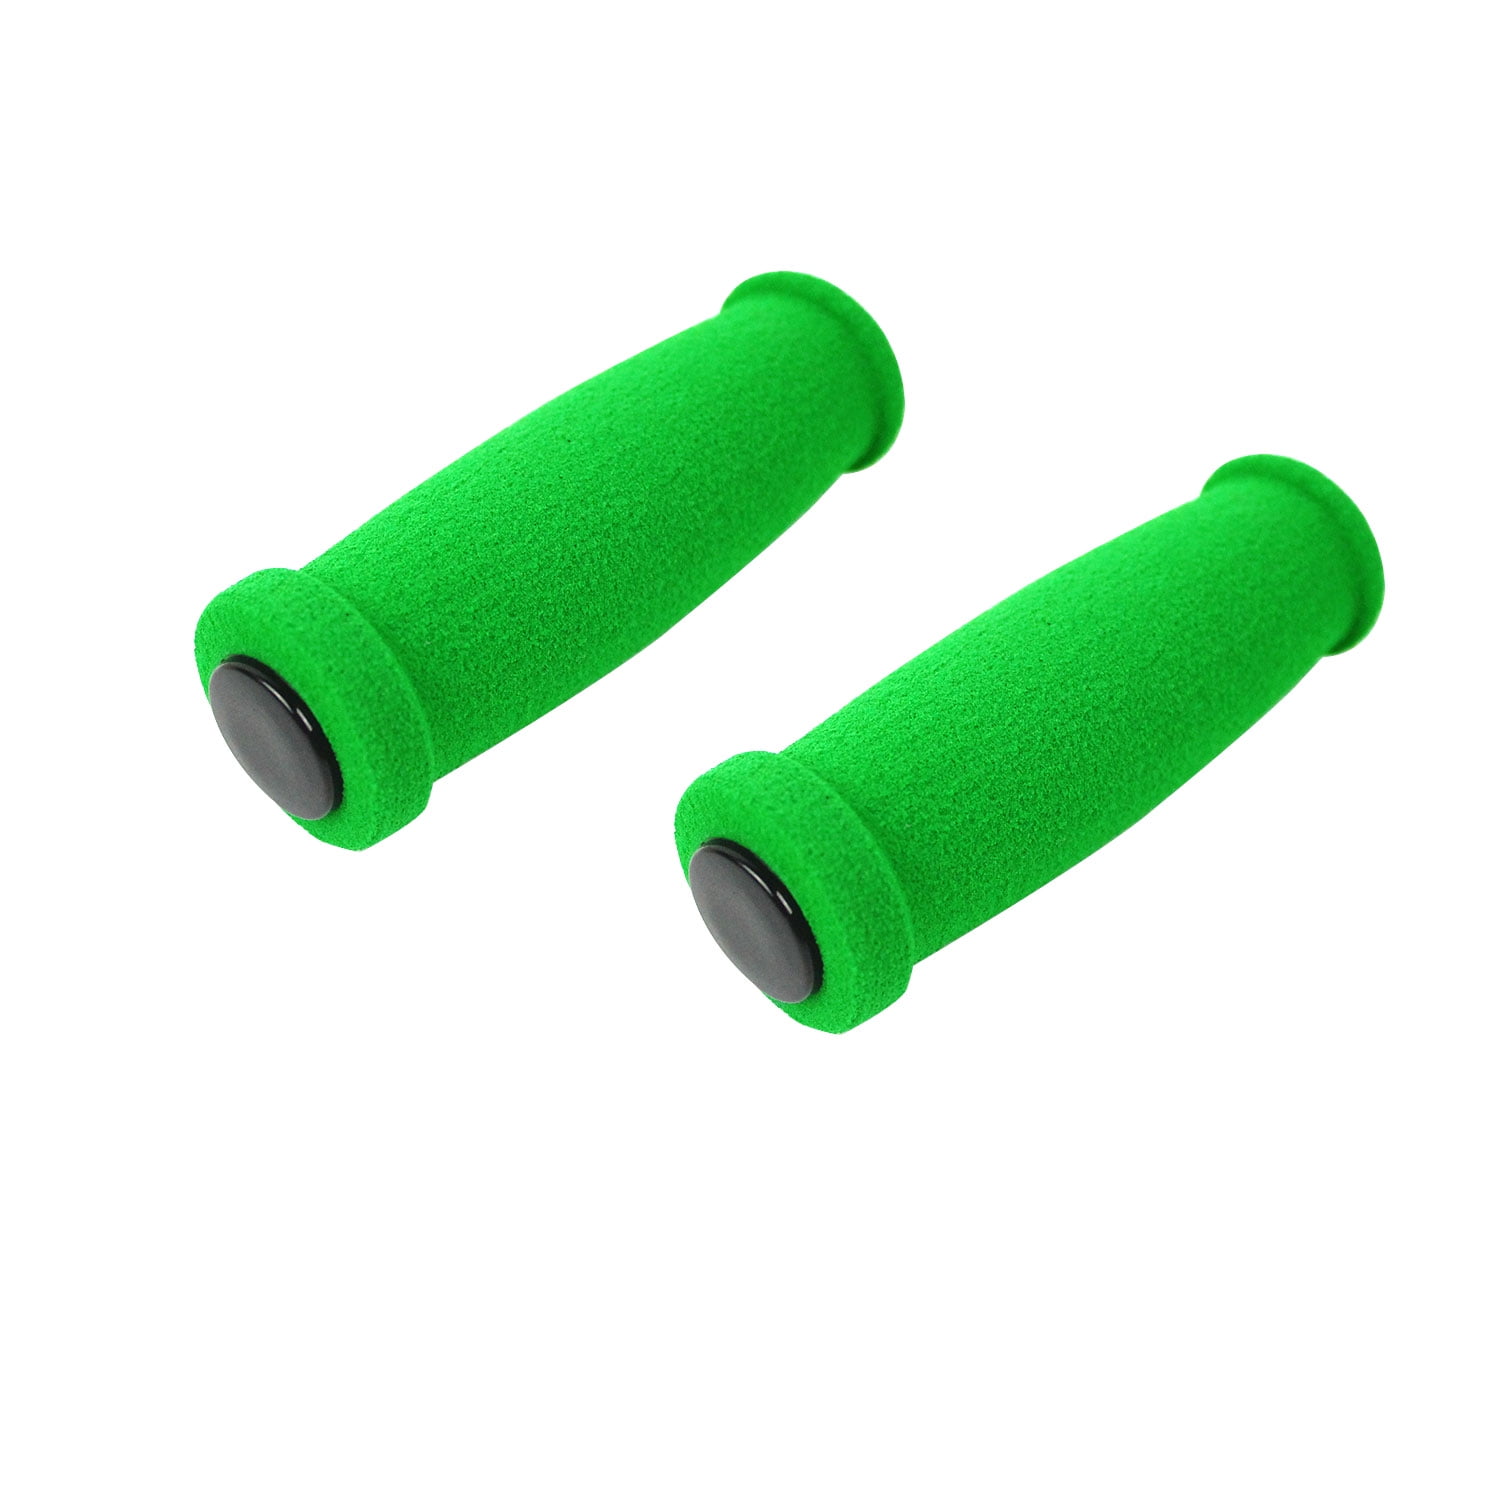 NEW REPLACEMENT Grip Tape GRIT for RAZOR SCOOTER D.GREEN 